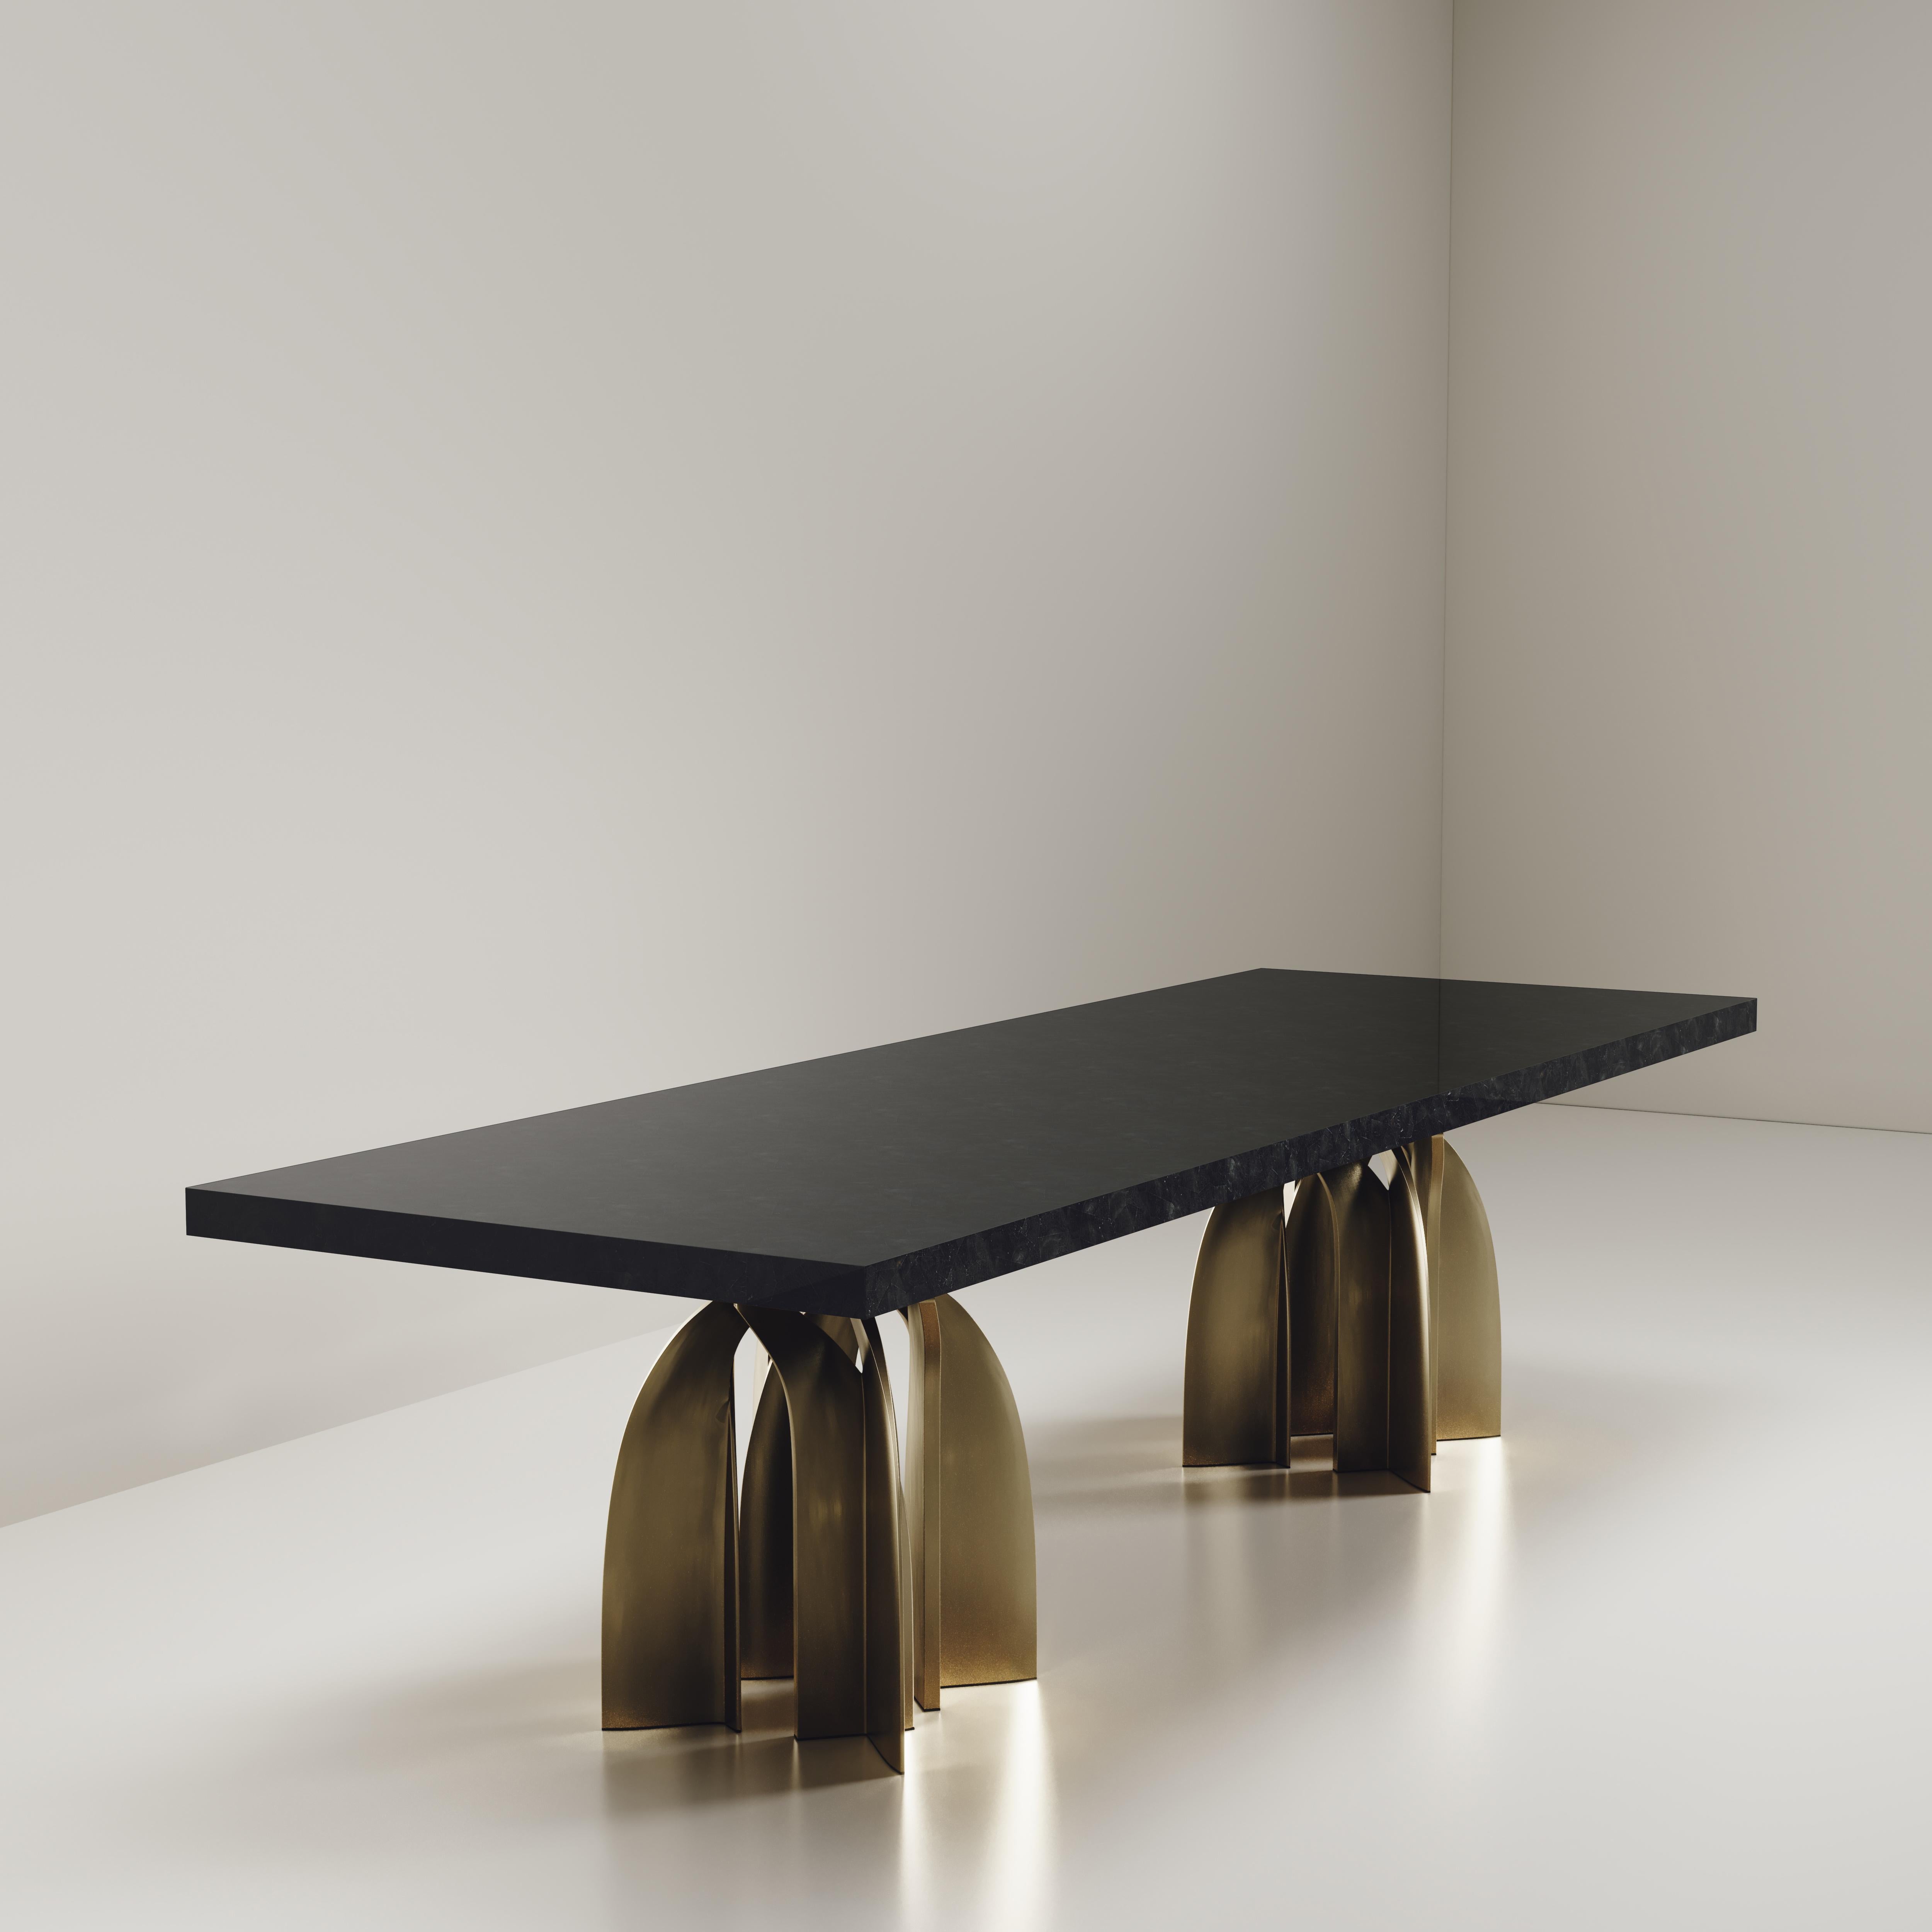 Sculptural Dining Table in Shagreen & Stainless Steel by Kifu Paris For Sale 2